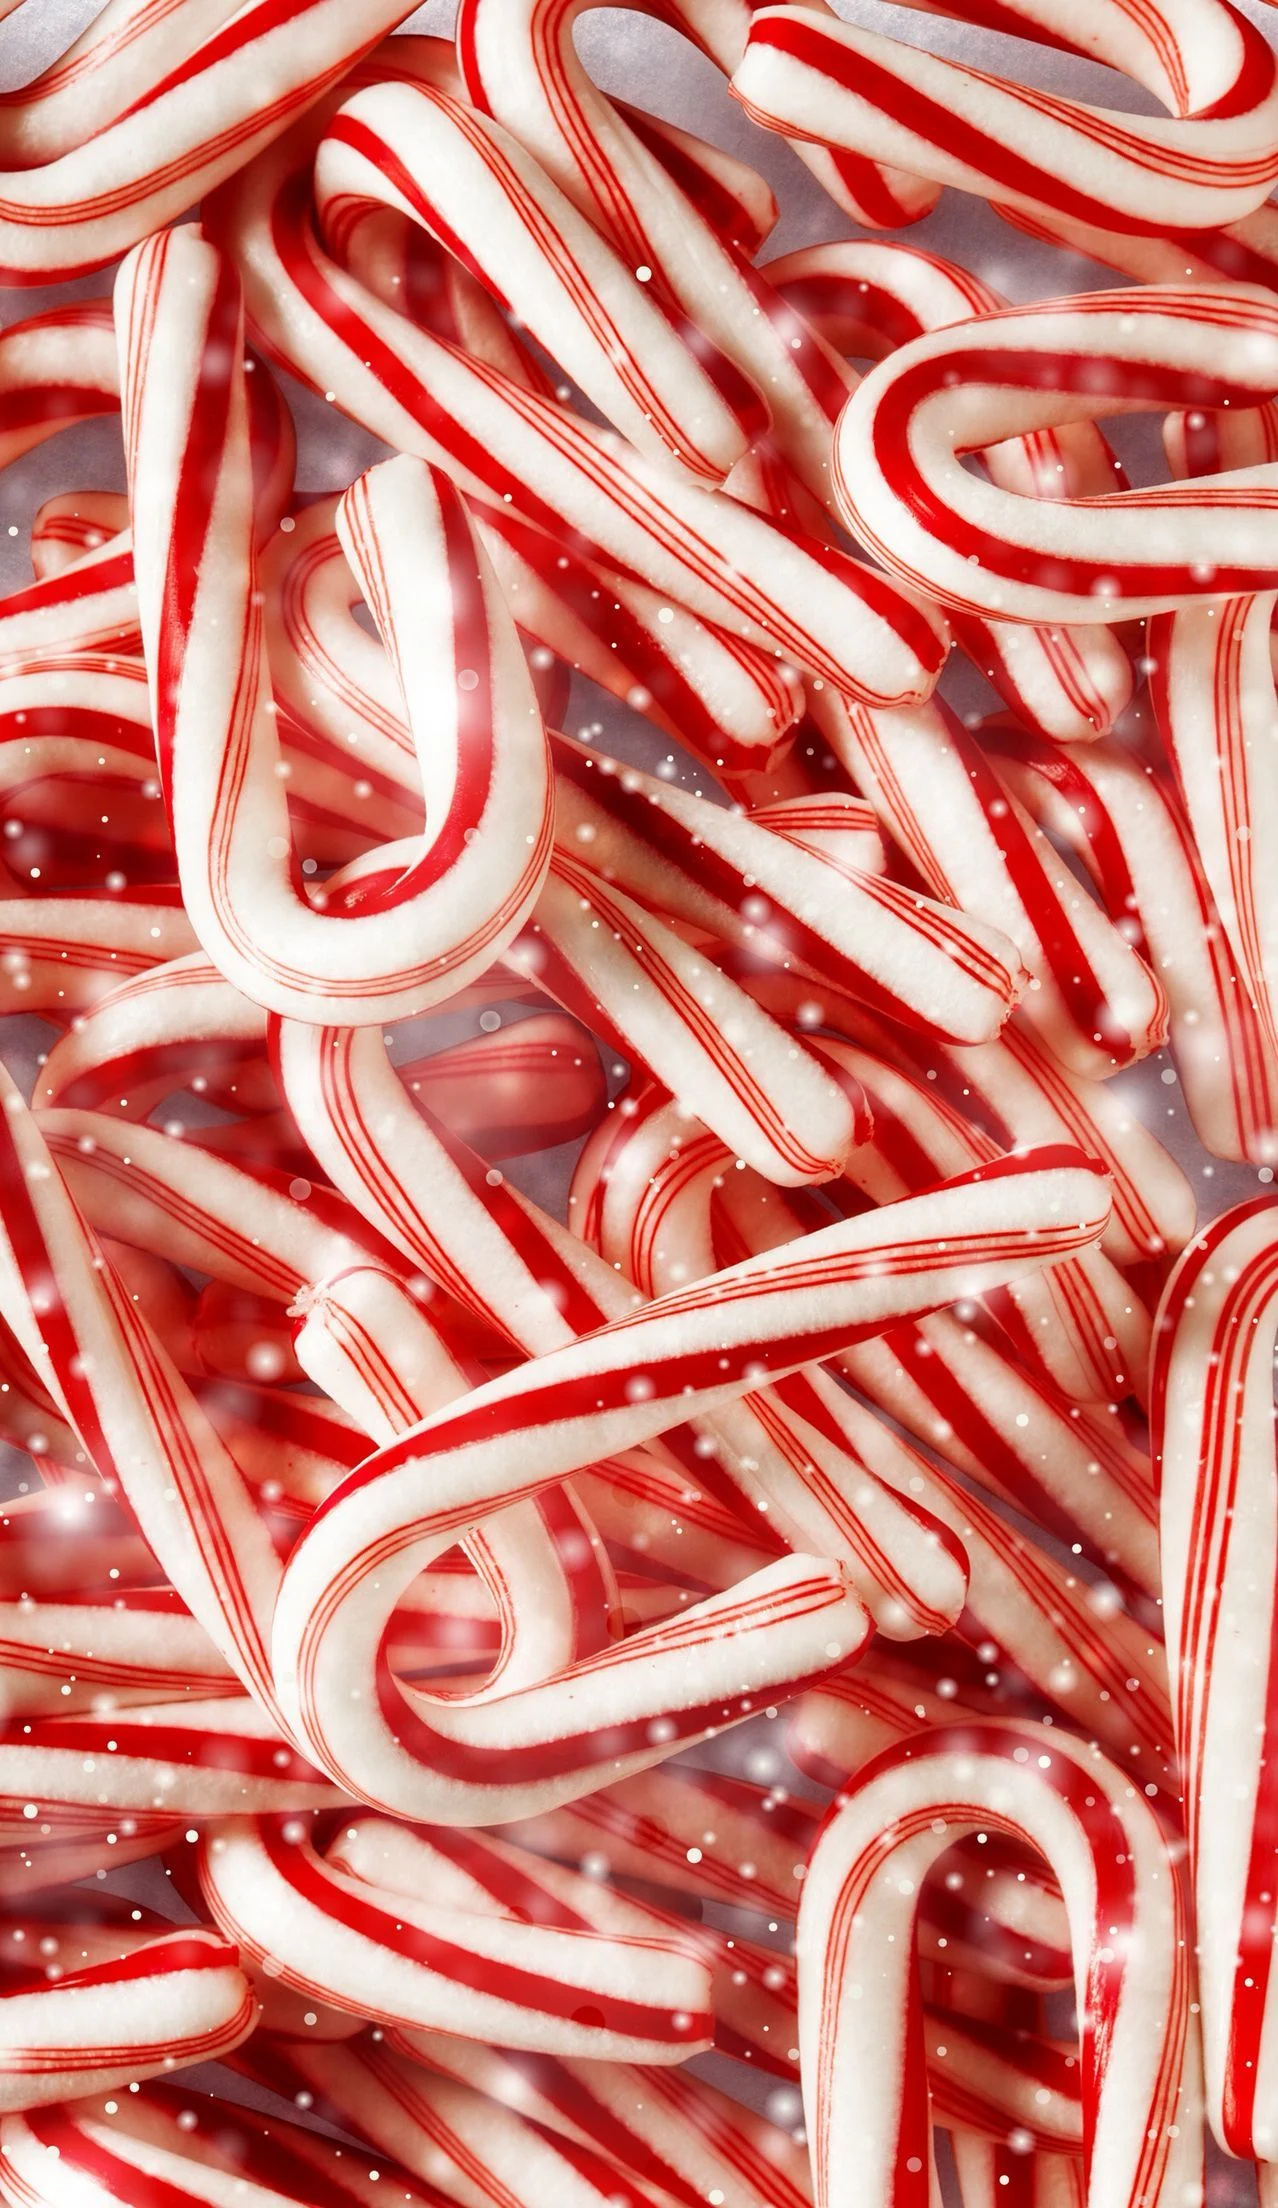 Candy canes iPhone wallpapers, Festive holiday sweets, Sweet treats on your screen, Christmas candy joy, 1280x2210 HD Phone